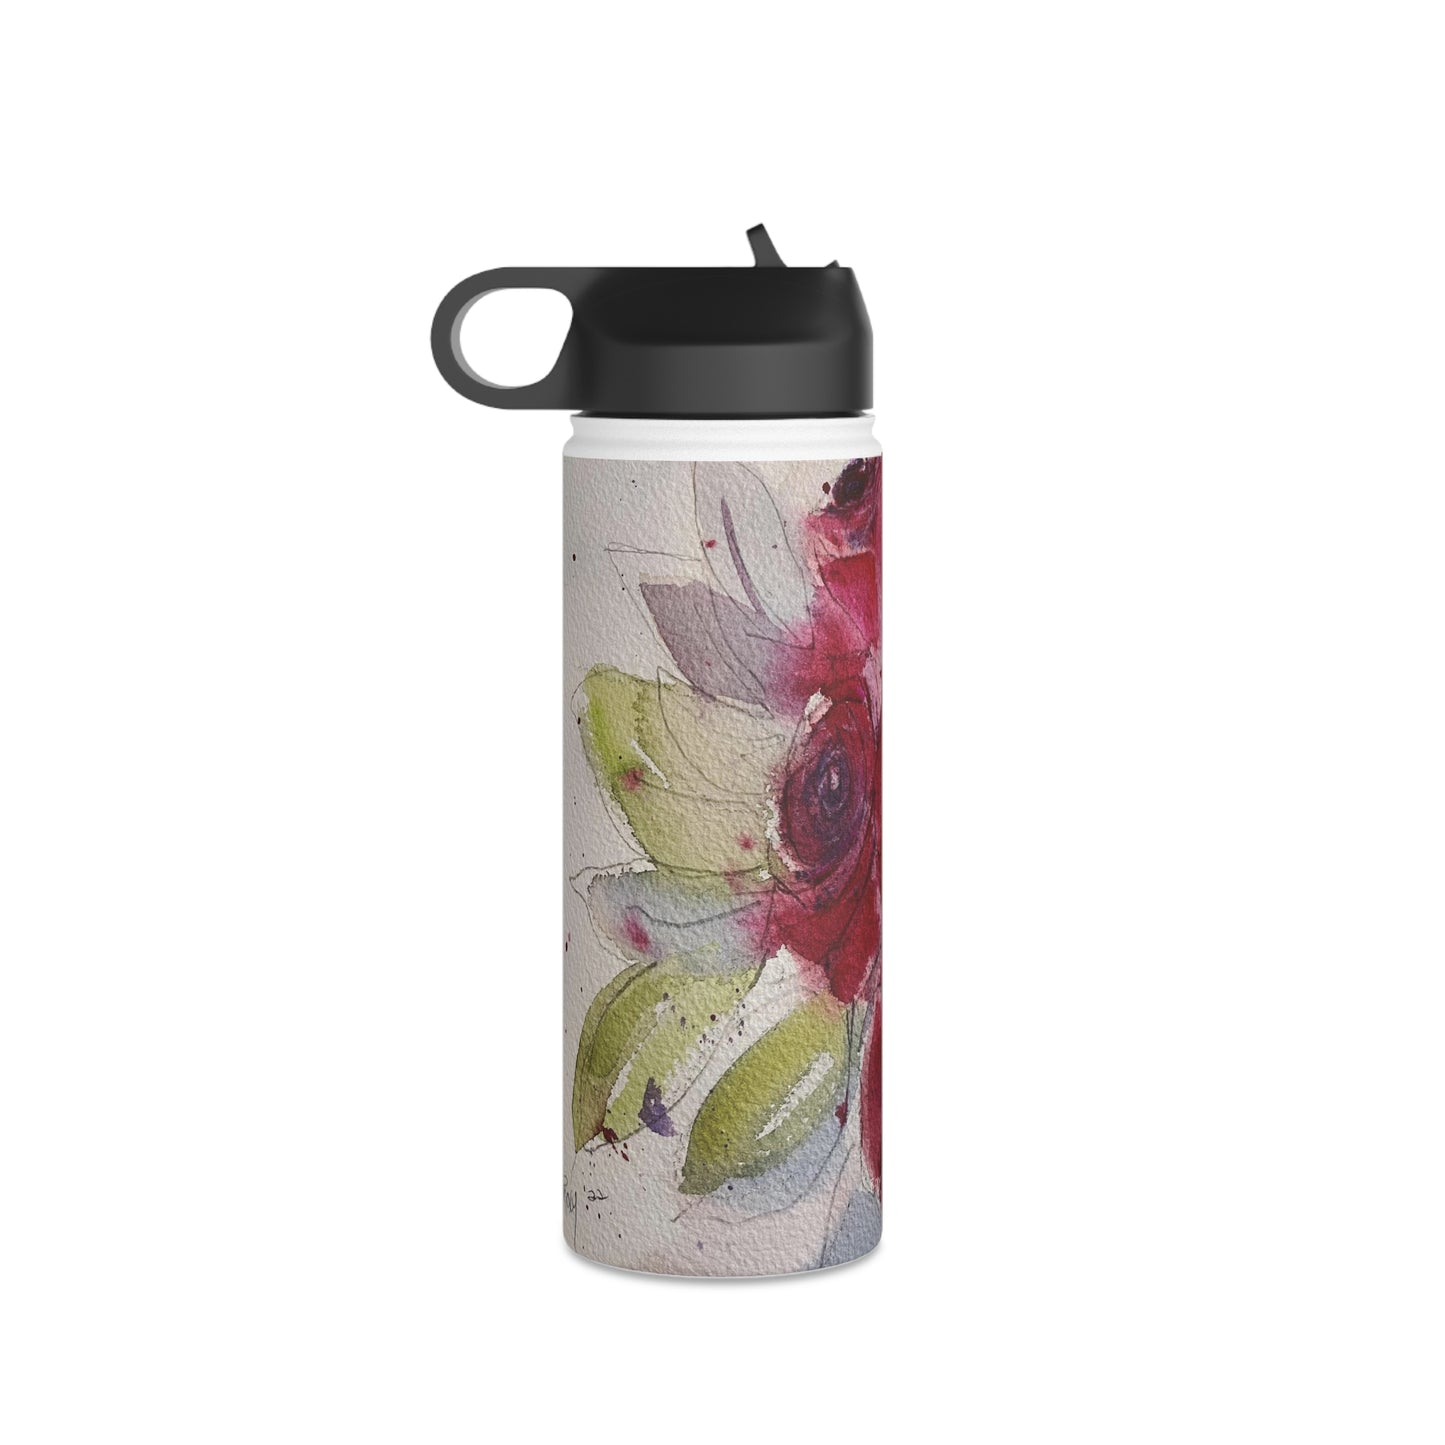 Red Roses Stainless Steel Water Bottle, Standard Lid